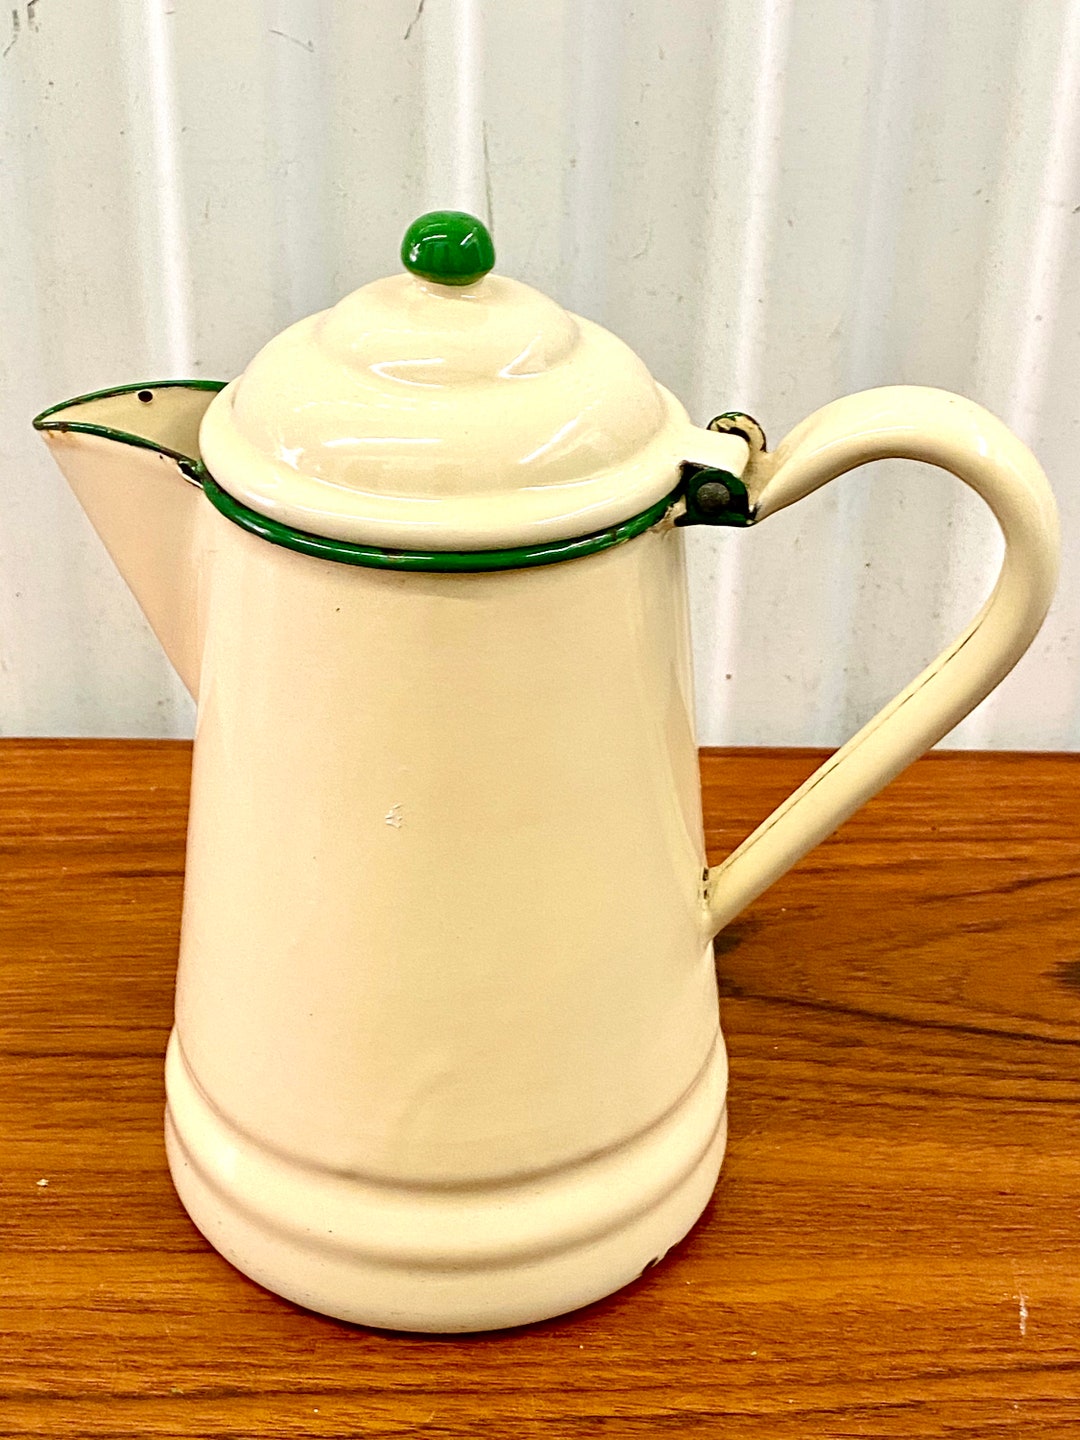 Sold at Auction: Green Enamelware Coffee Pot with Green Percolator Glass  Top, 9 1/2 x 8 in. (24.1 x 20.3 cm.)